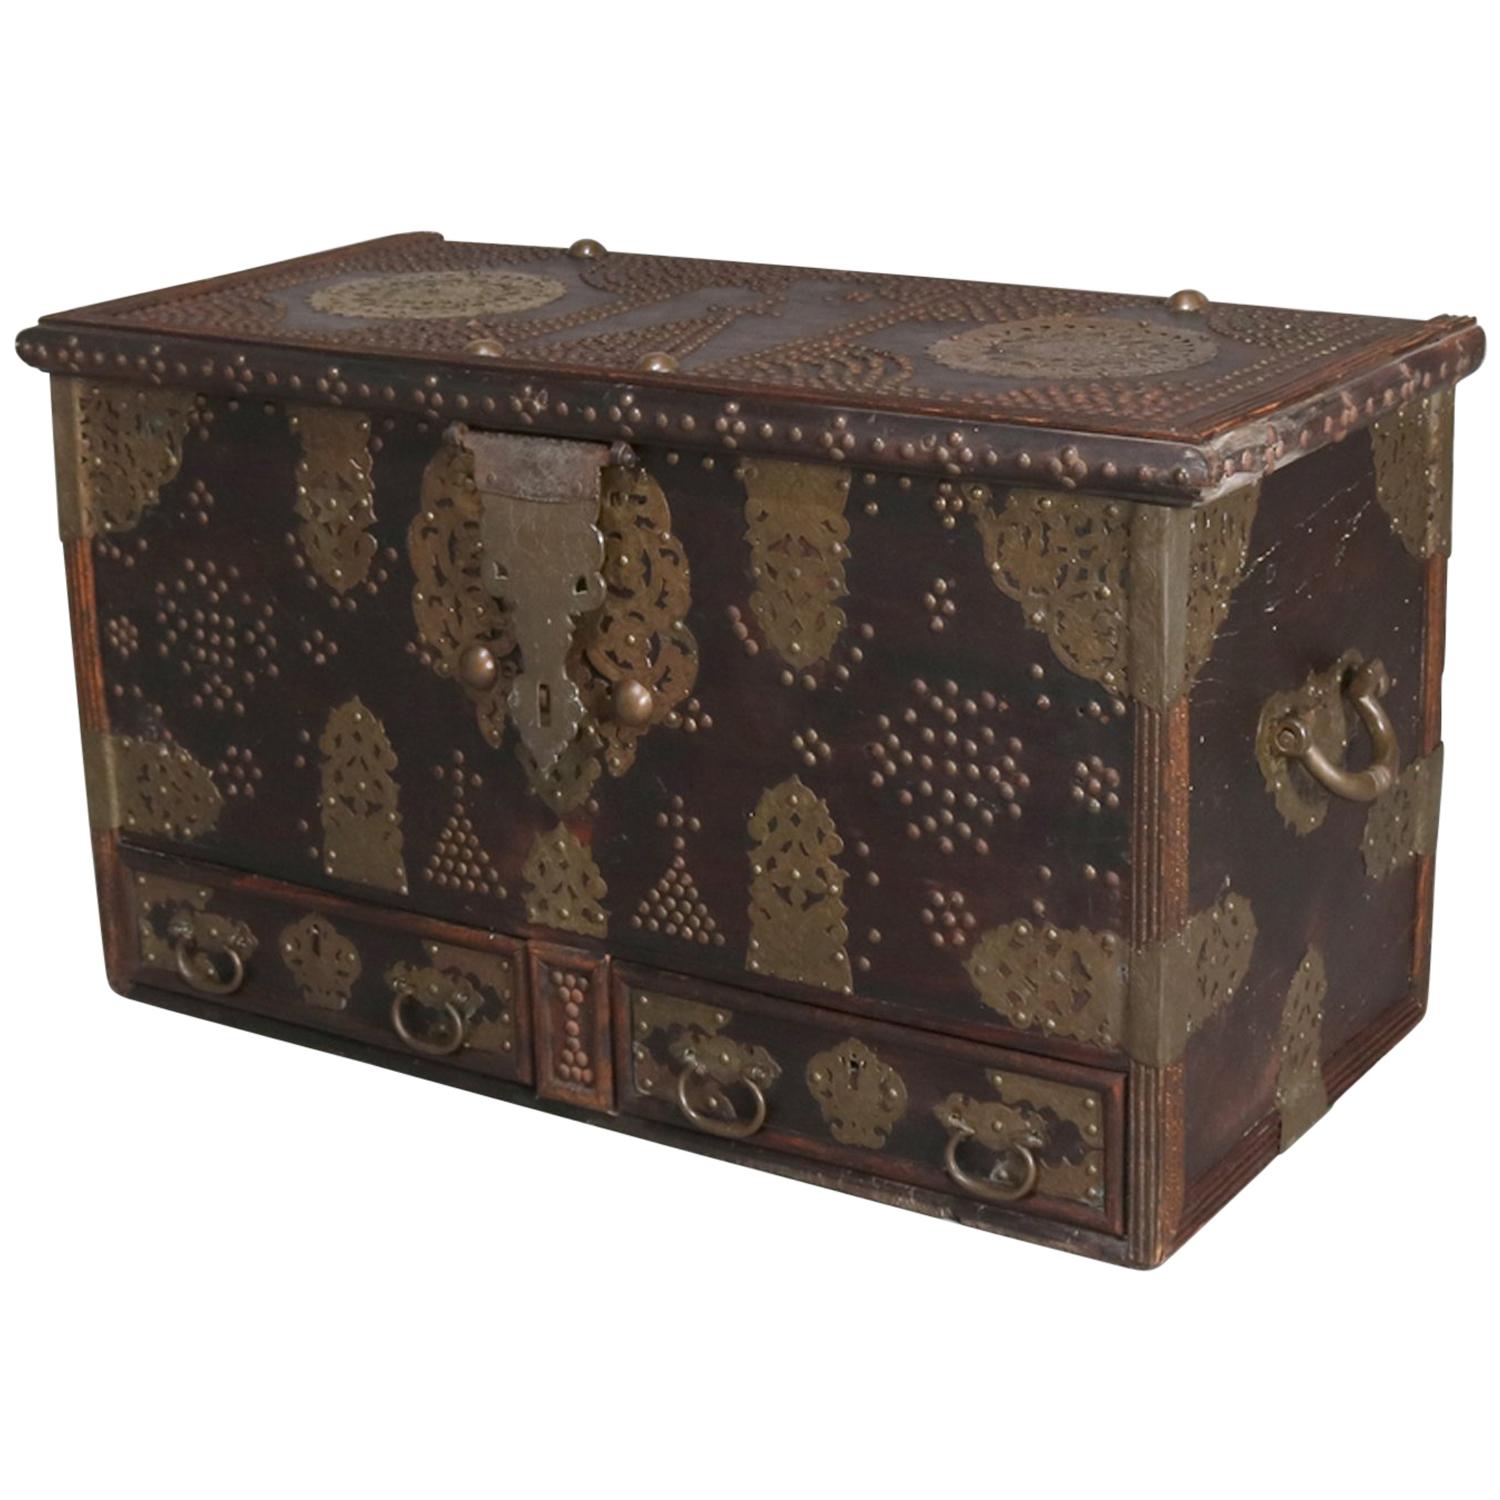 Antique Rosewood and Brass Turkish Marital Bride's Trunk, Early 19th Century